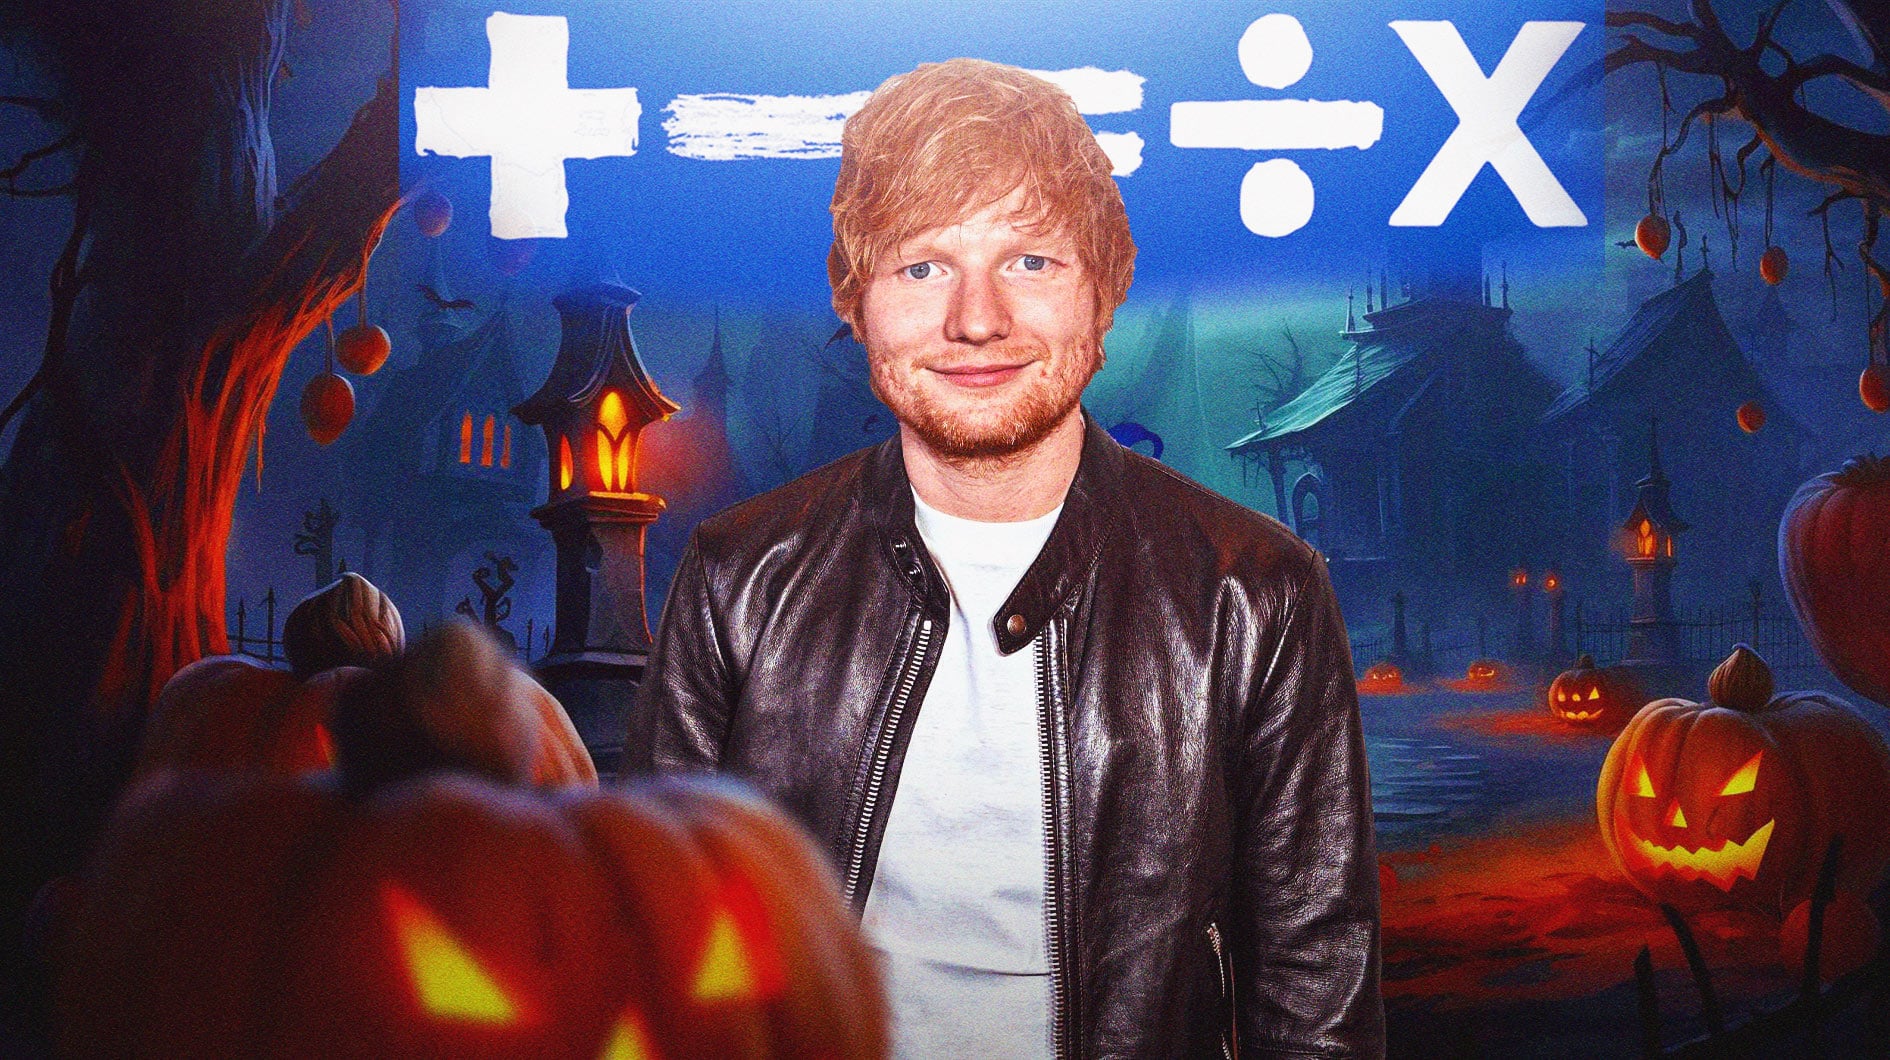 Ed Sheeran and the Mathematics Tour logo in front of Halloween background.